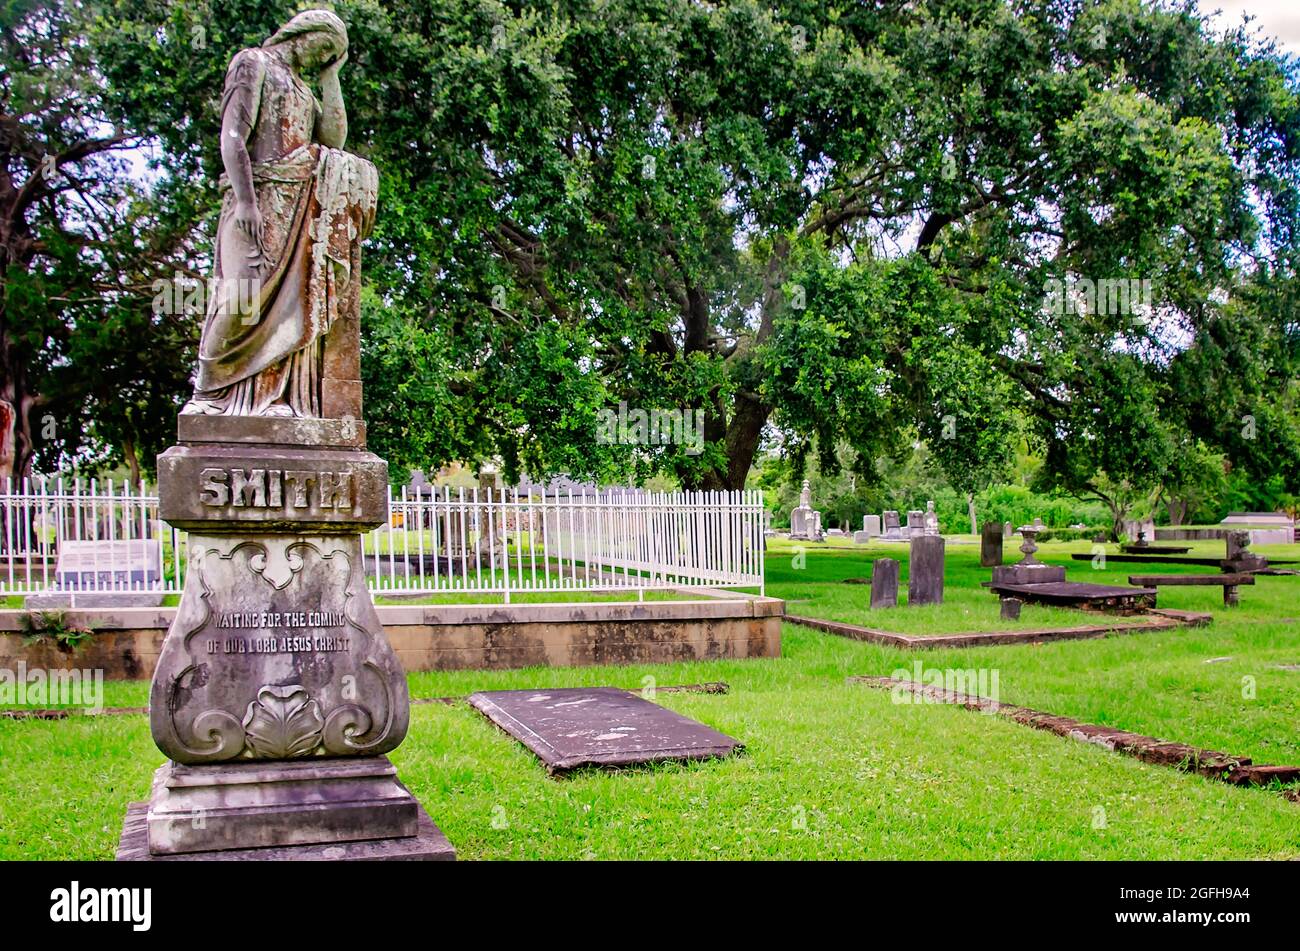 A cemetery angel stands over the Smith grave at Magnolia Cemetery, Aug. 14, 2021, in Mobile, Alabama. Stock Photo